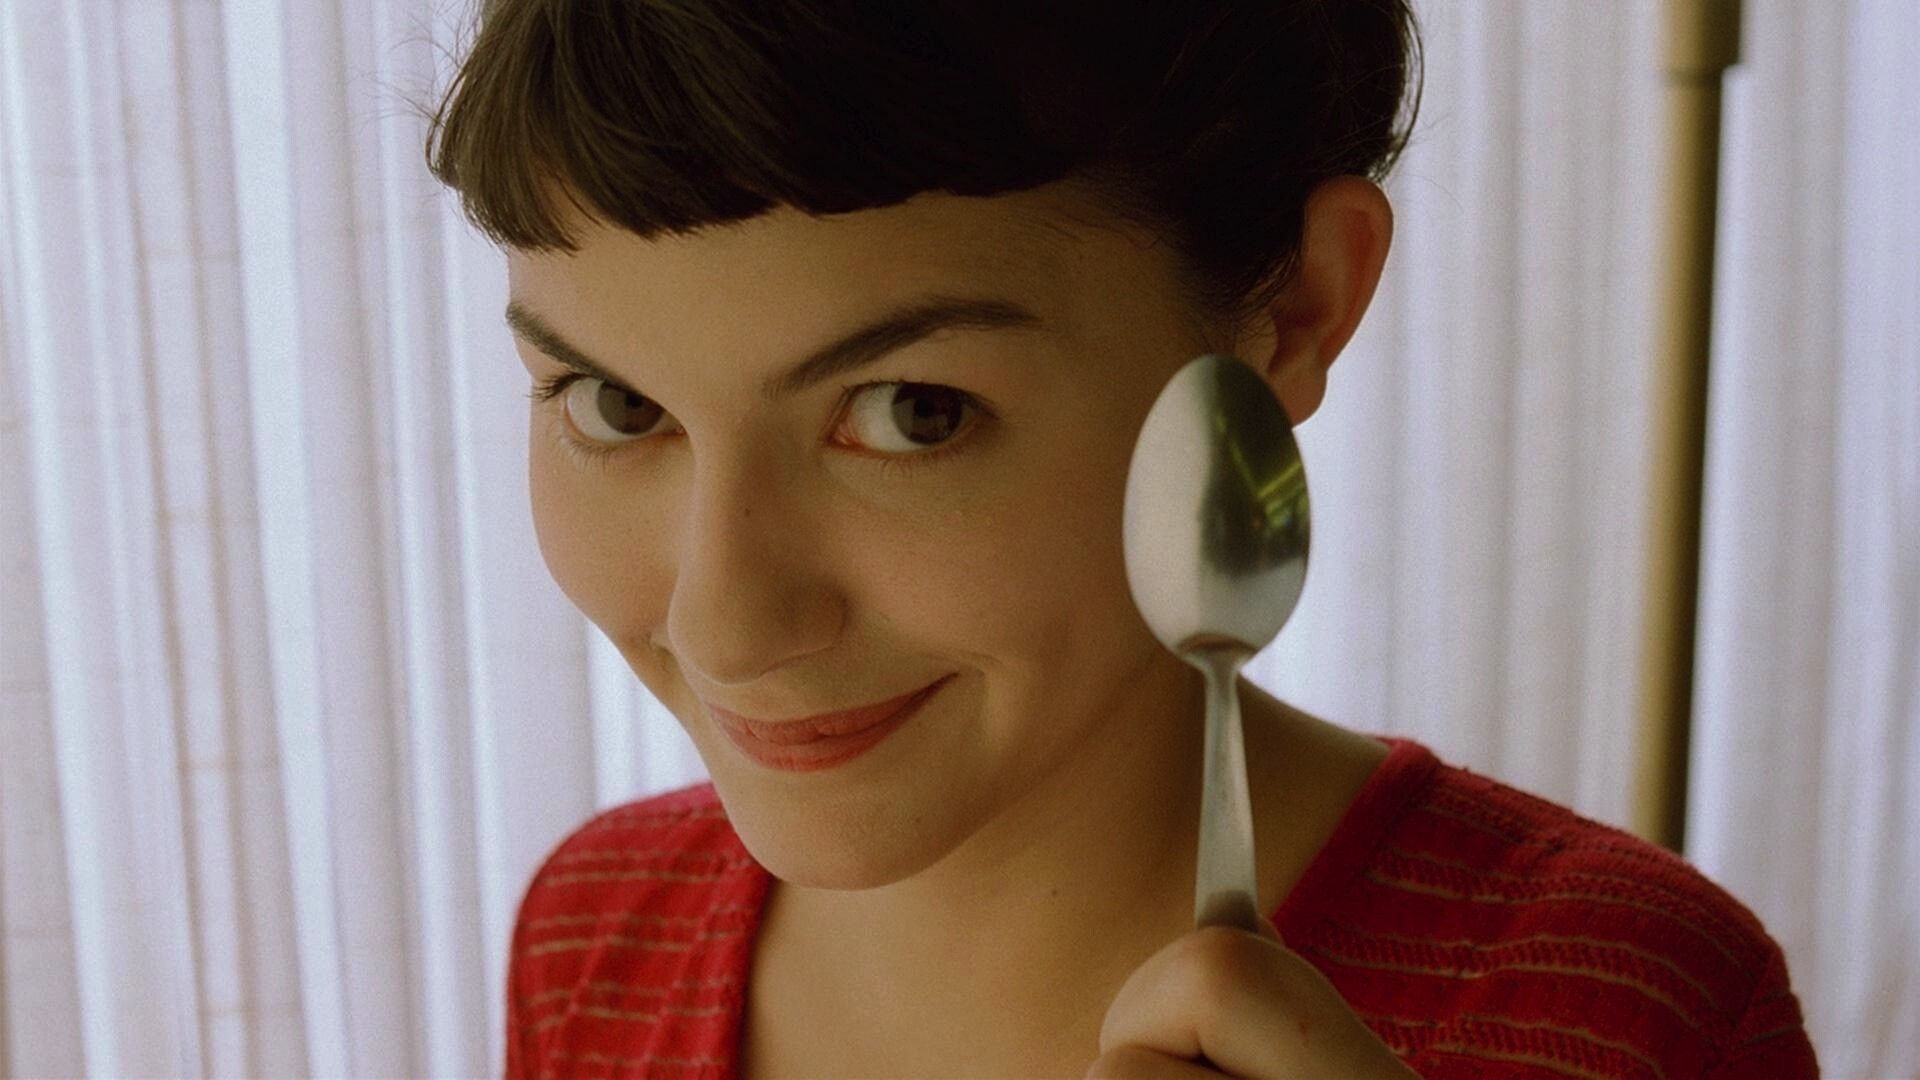 Amelie: The film was theatrically released in France on 25 April 2001. 1920x1080 Full HD Wallpaper.